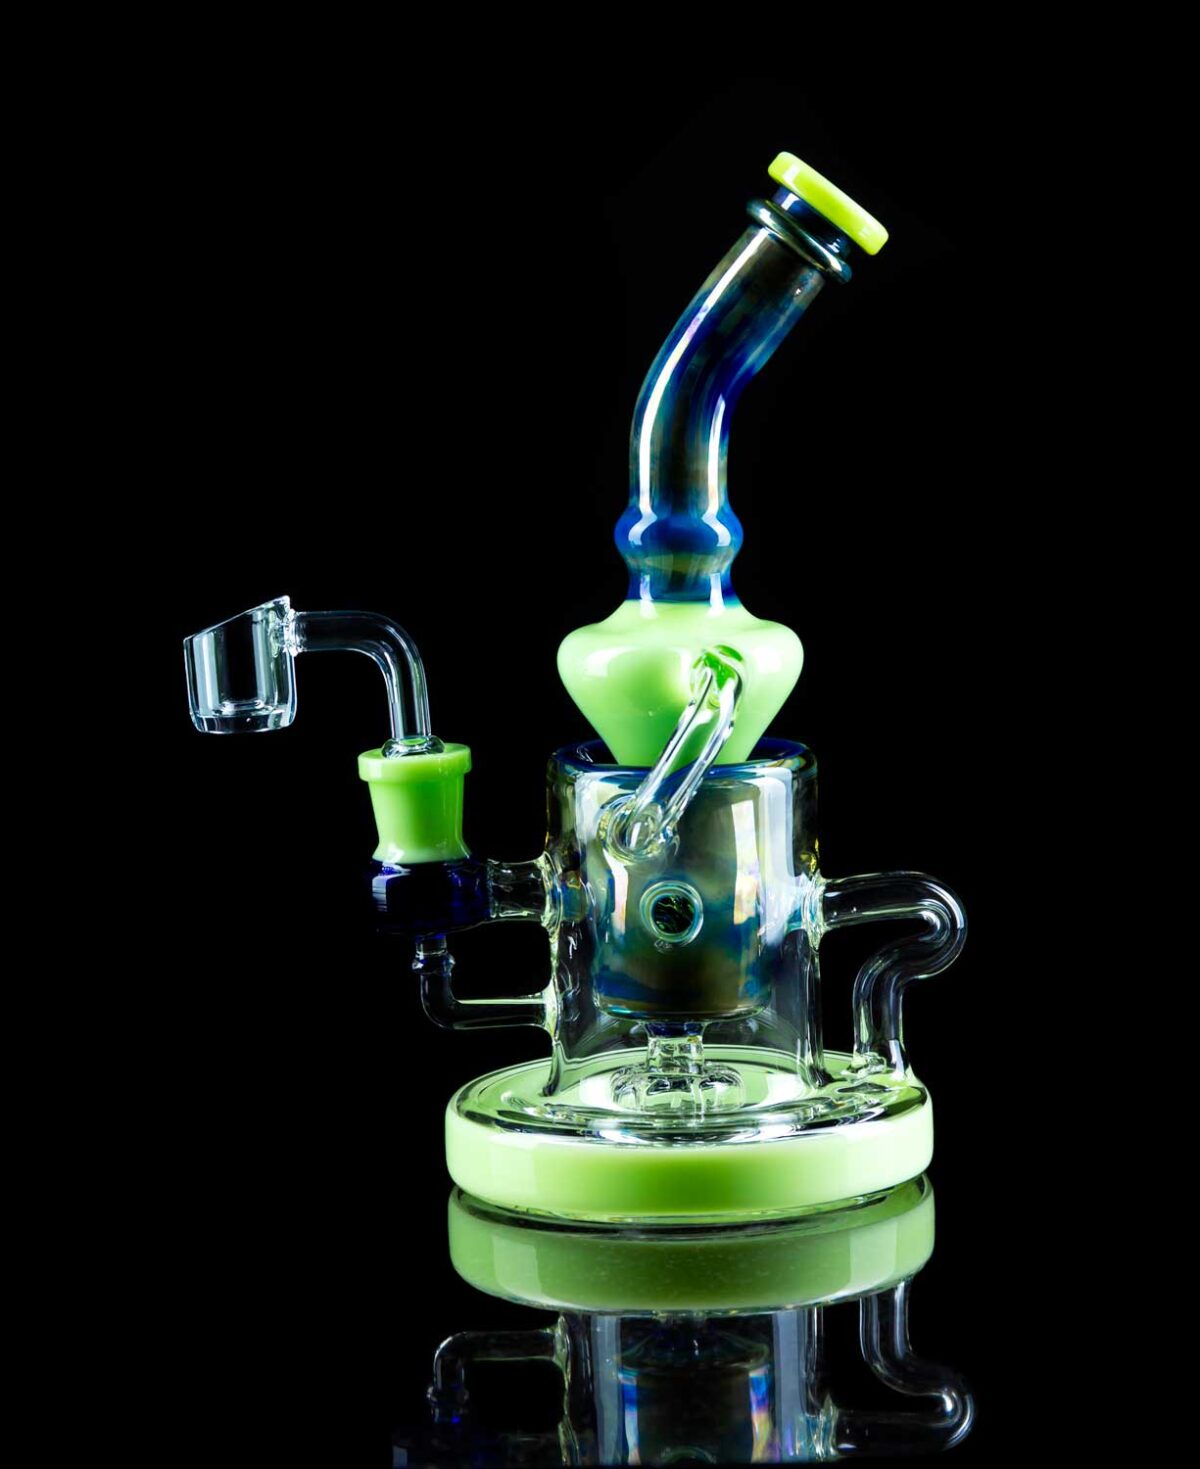 incycler dab rig with green and blue accents